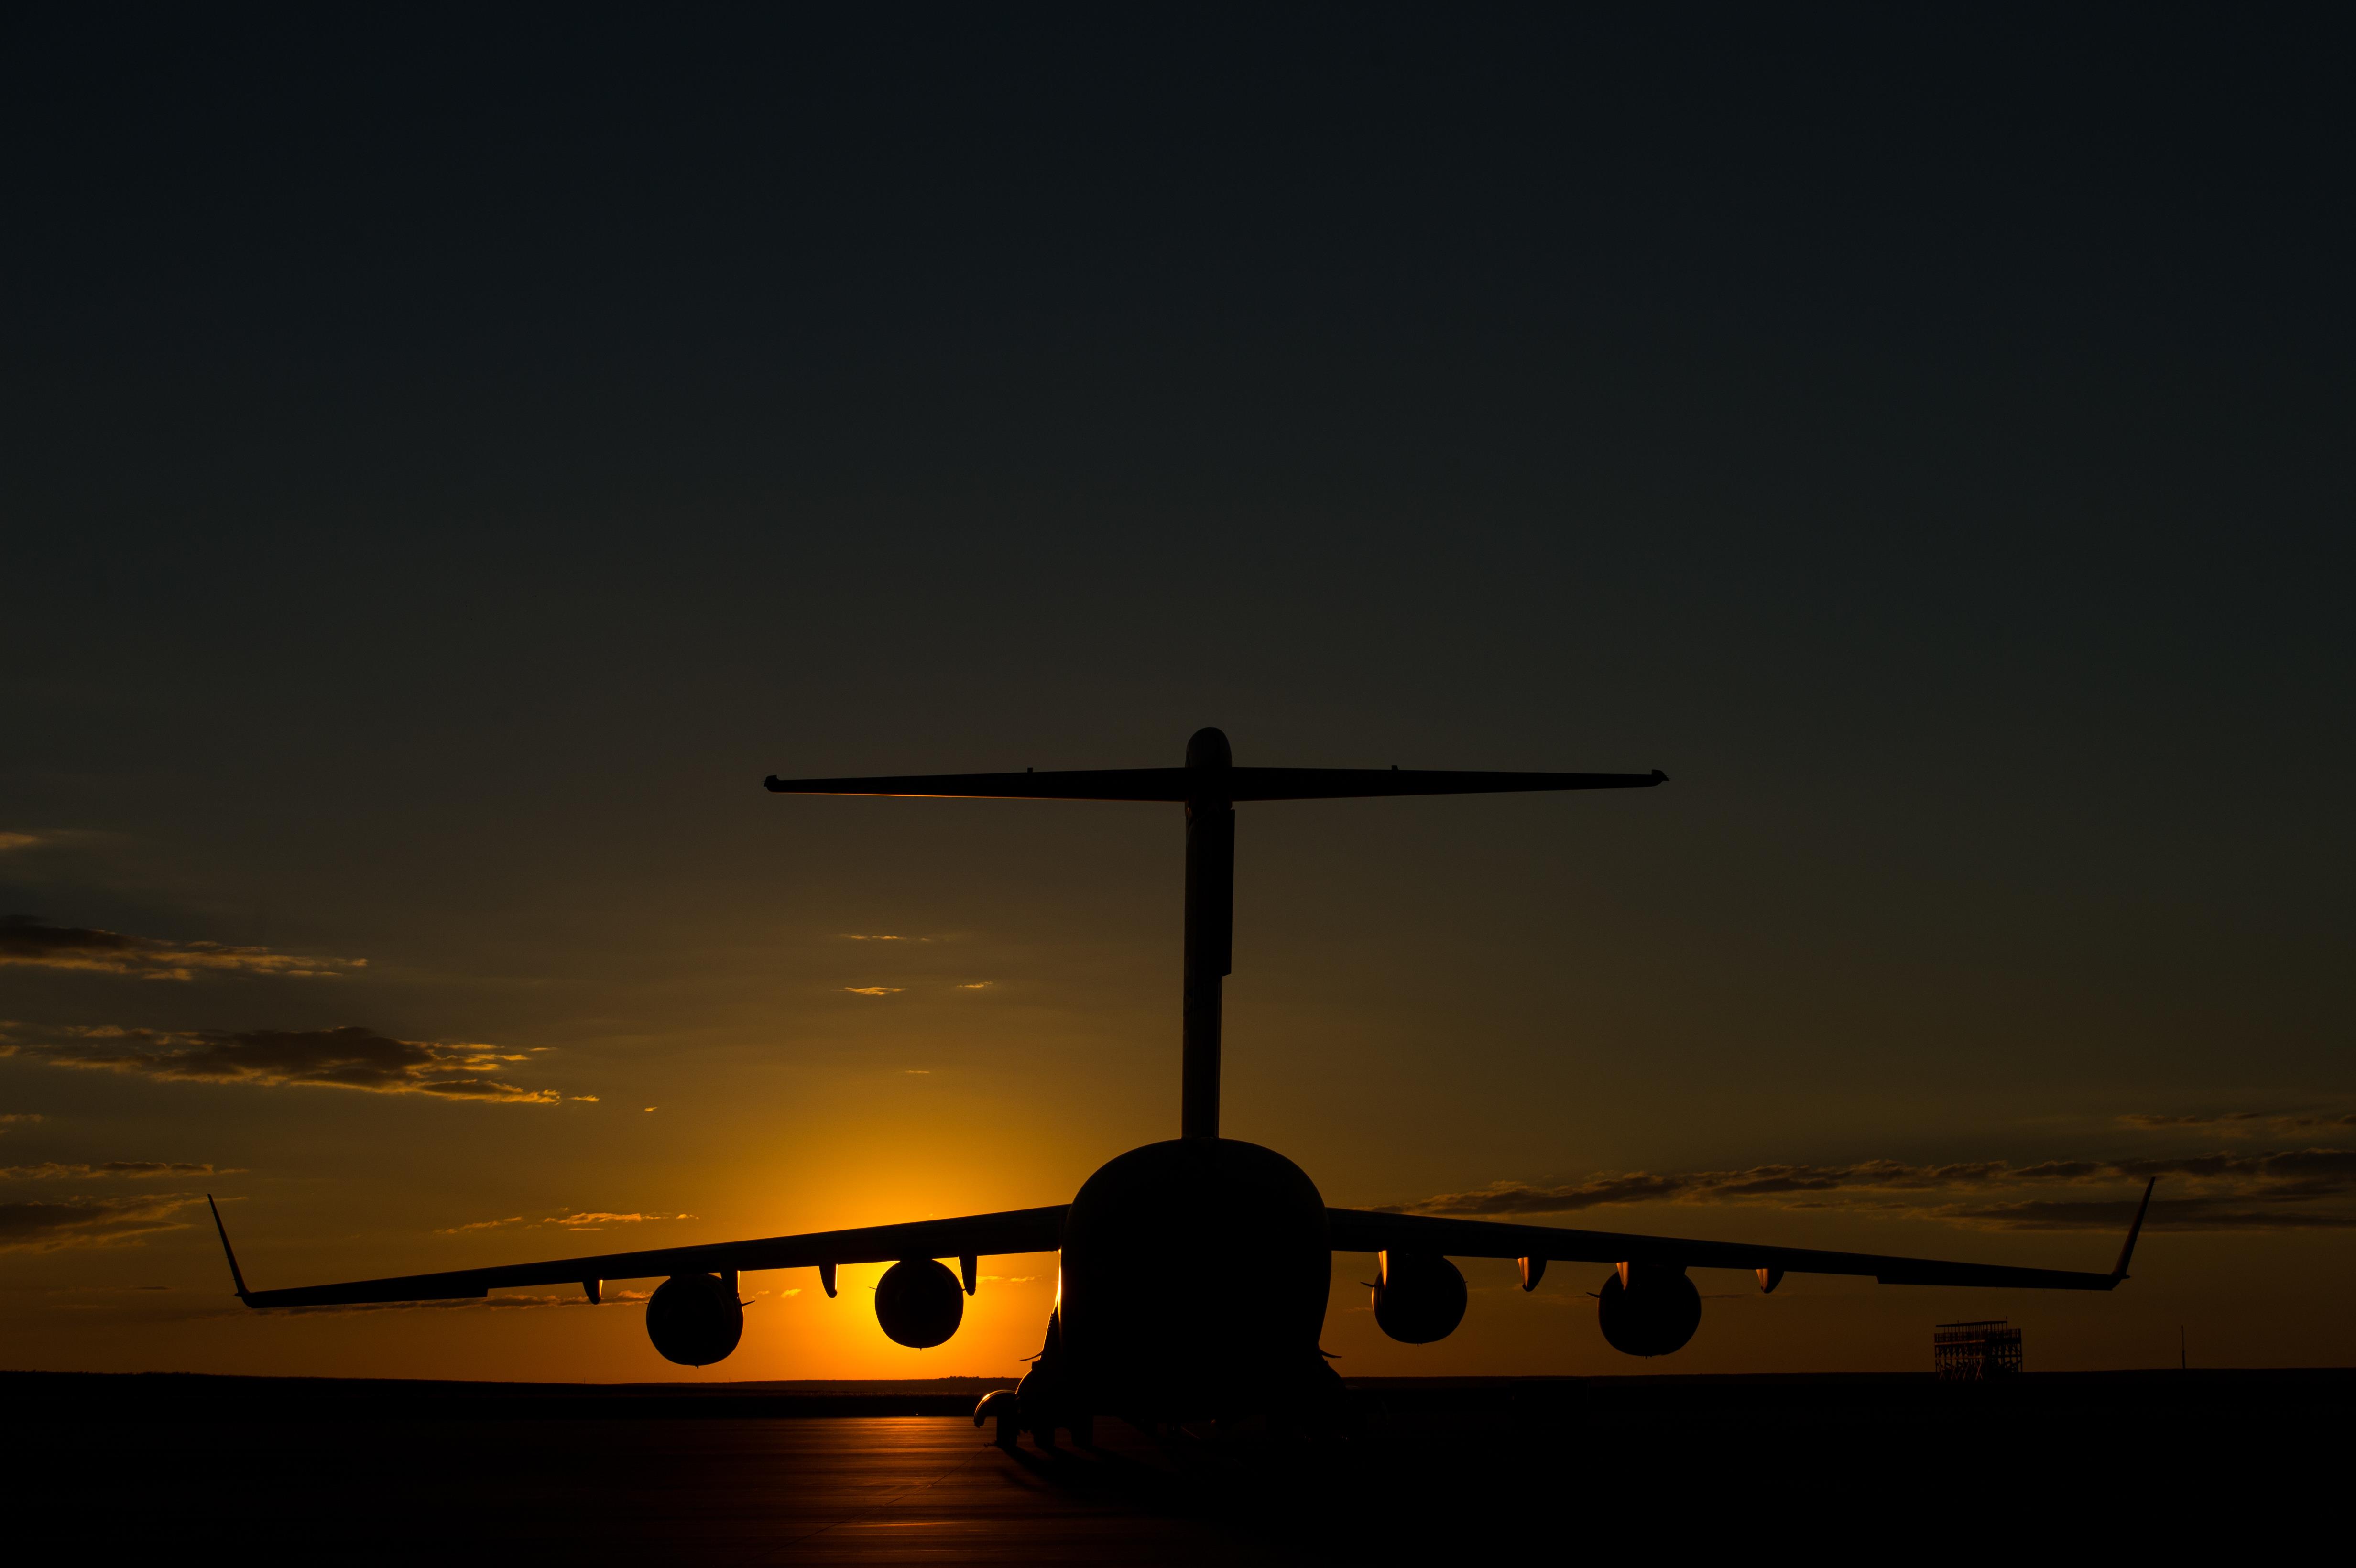 Boeing C-17 Globemaster III Sits on the Parking Ramp Runway Before a Mission by Joseph Swafford